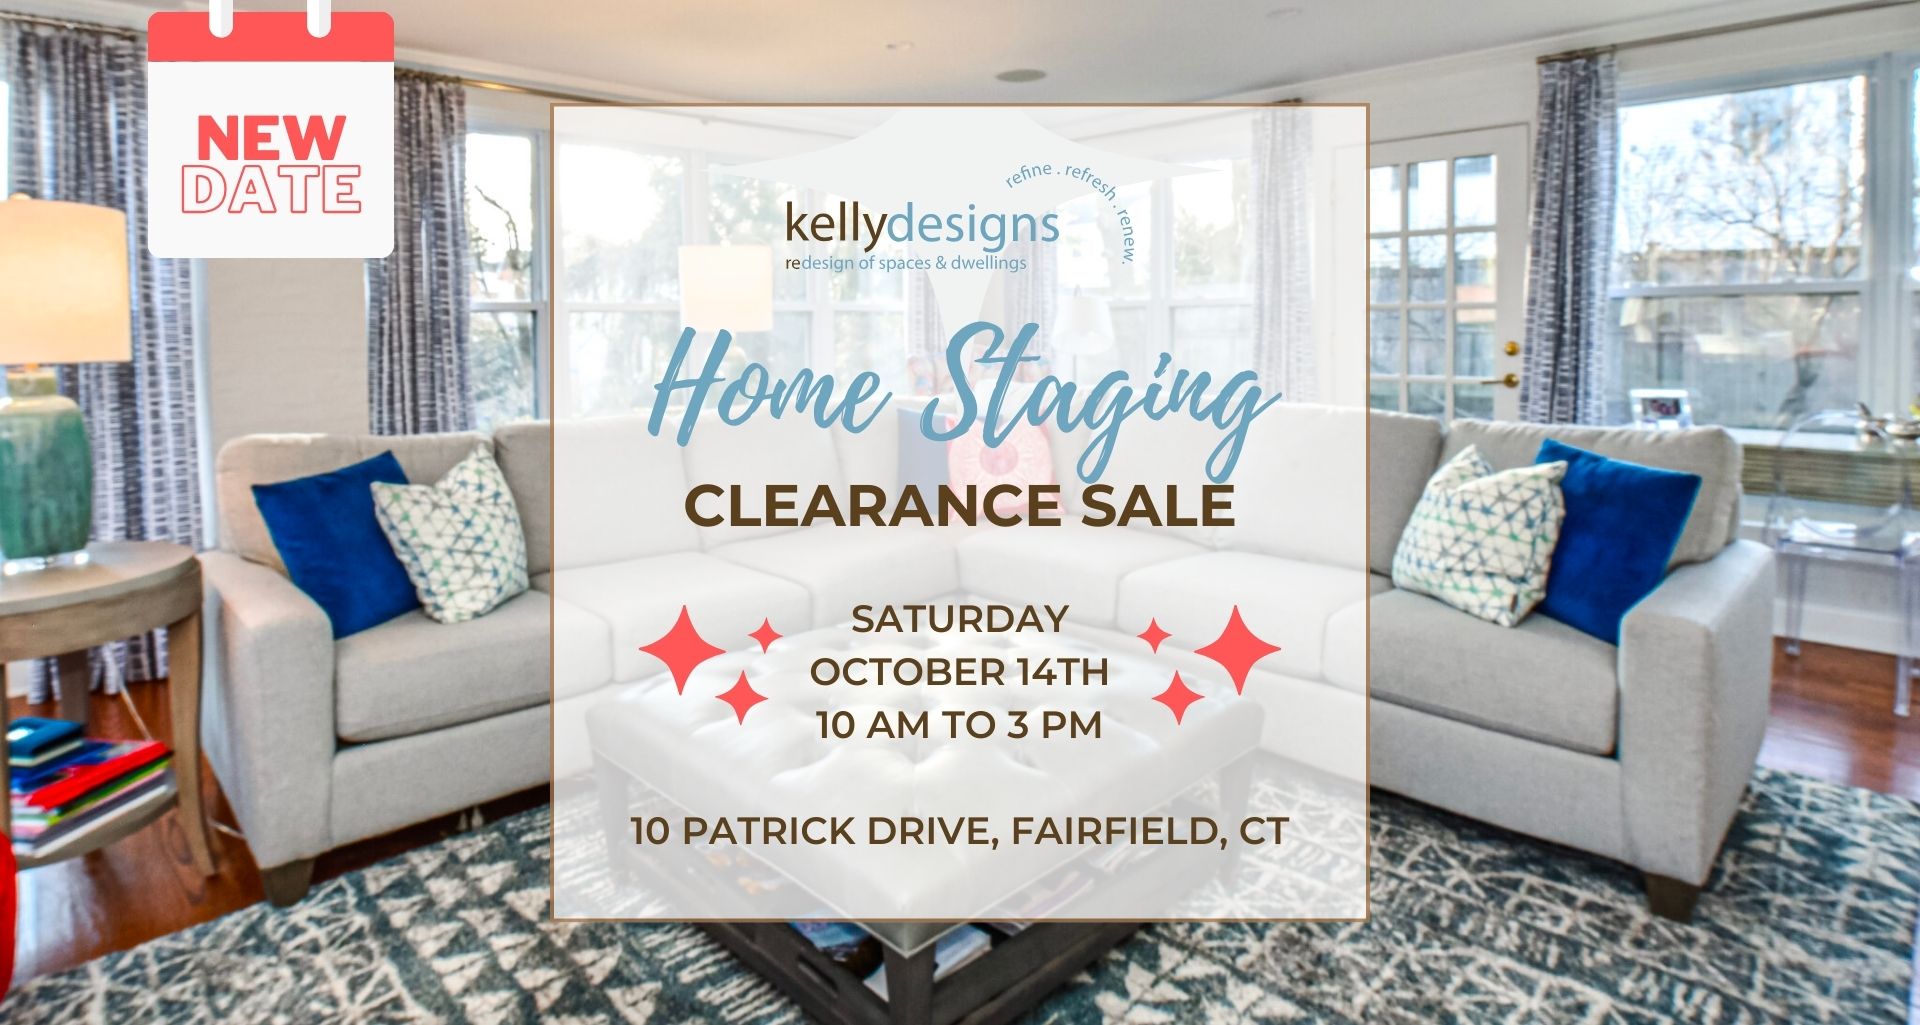 Home Staging Clearance Sale